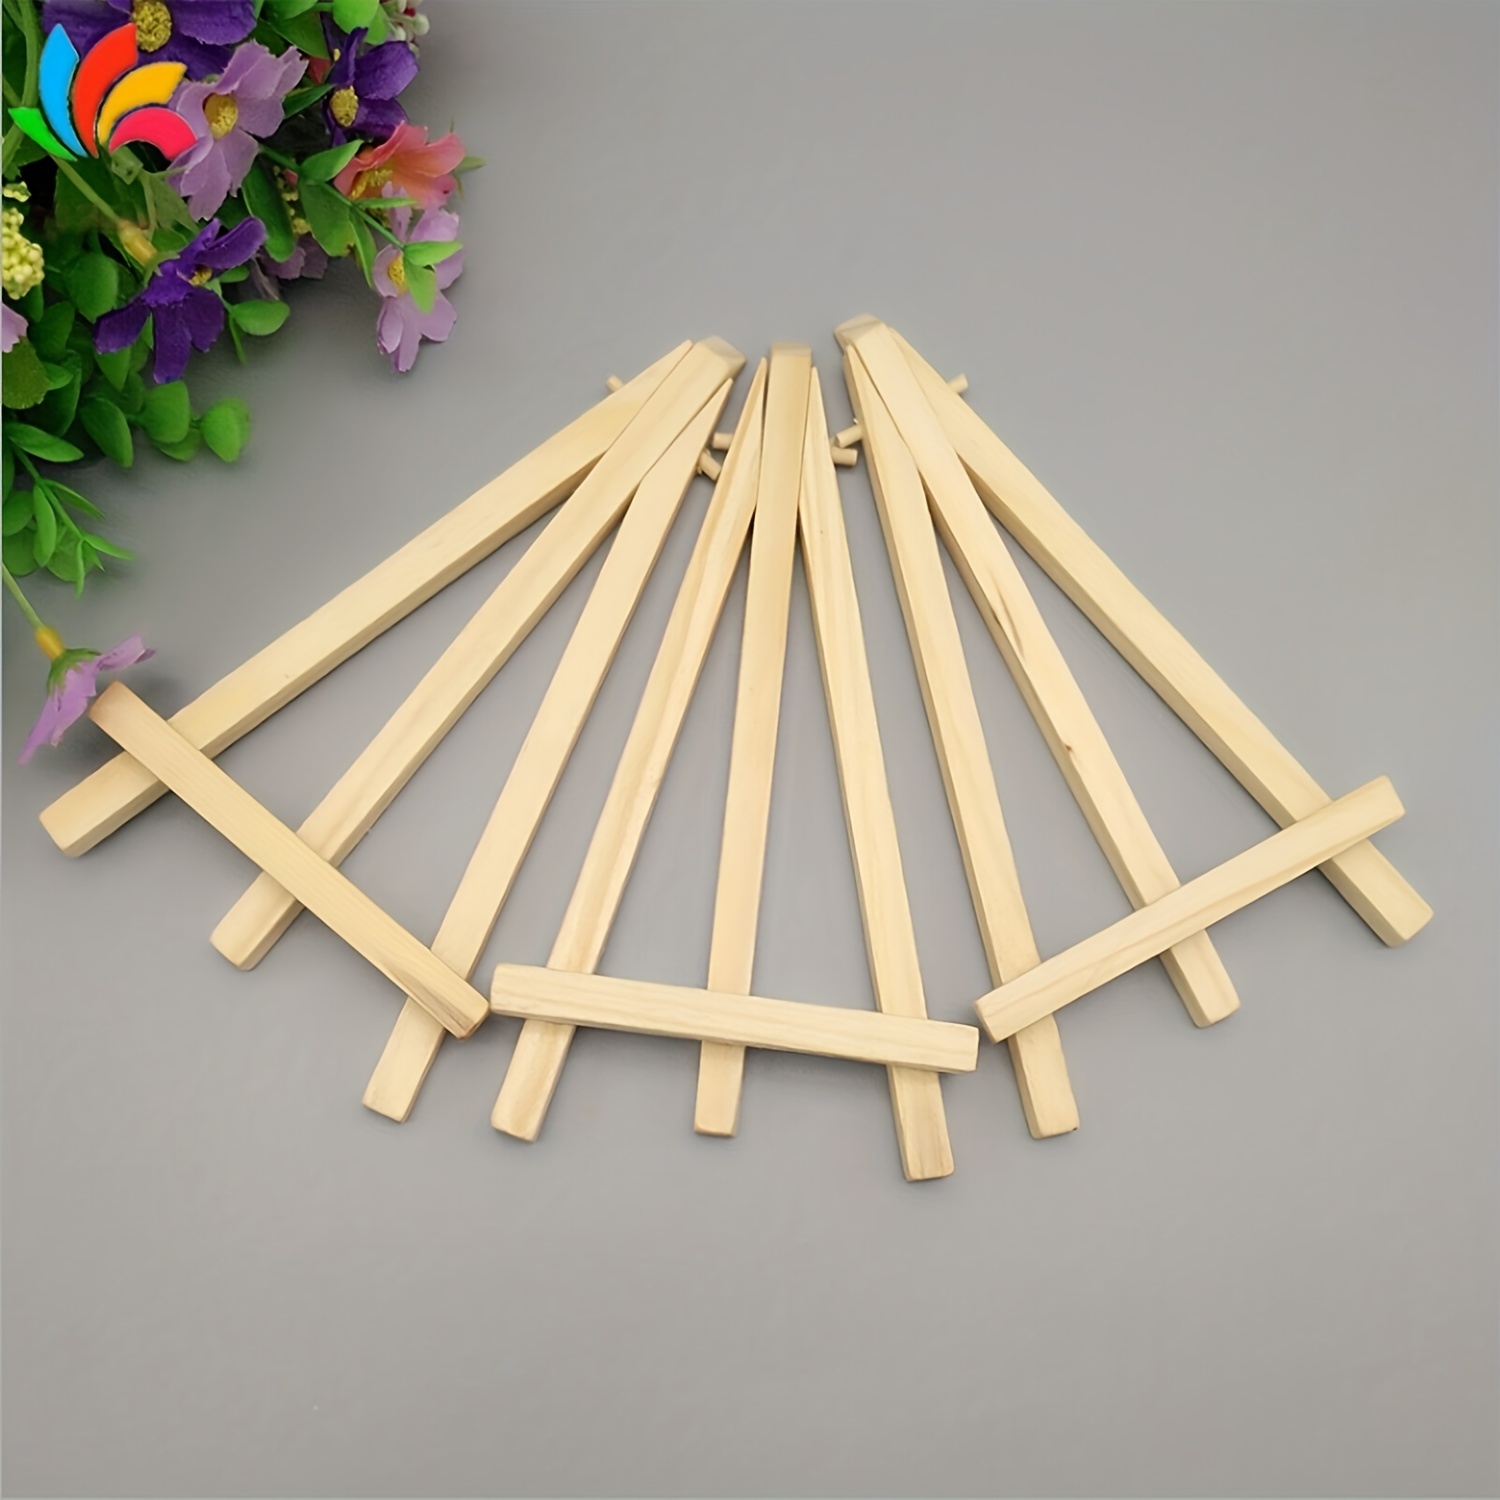 10pcs Wooden Mini Easel Frame Wedding Table Number Stand Photo Display  Holder